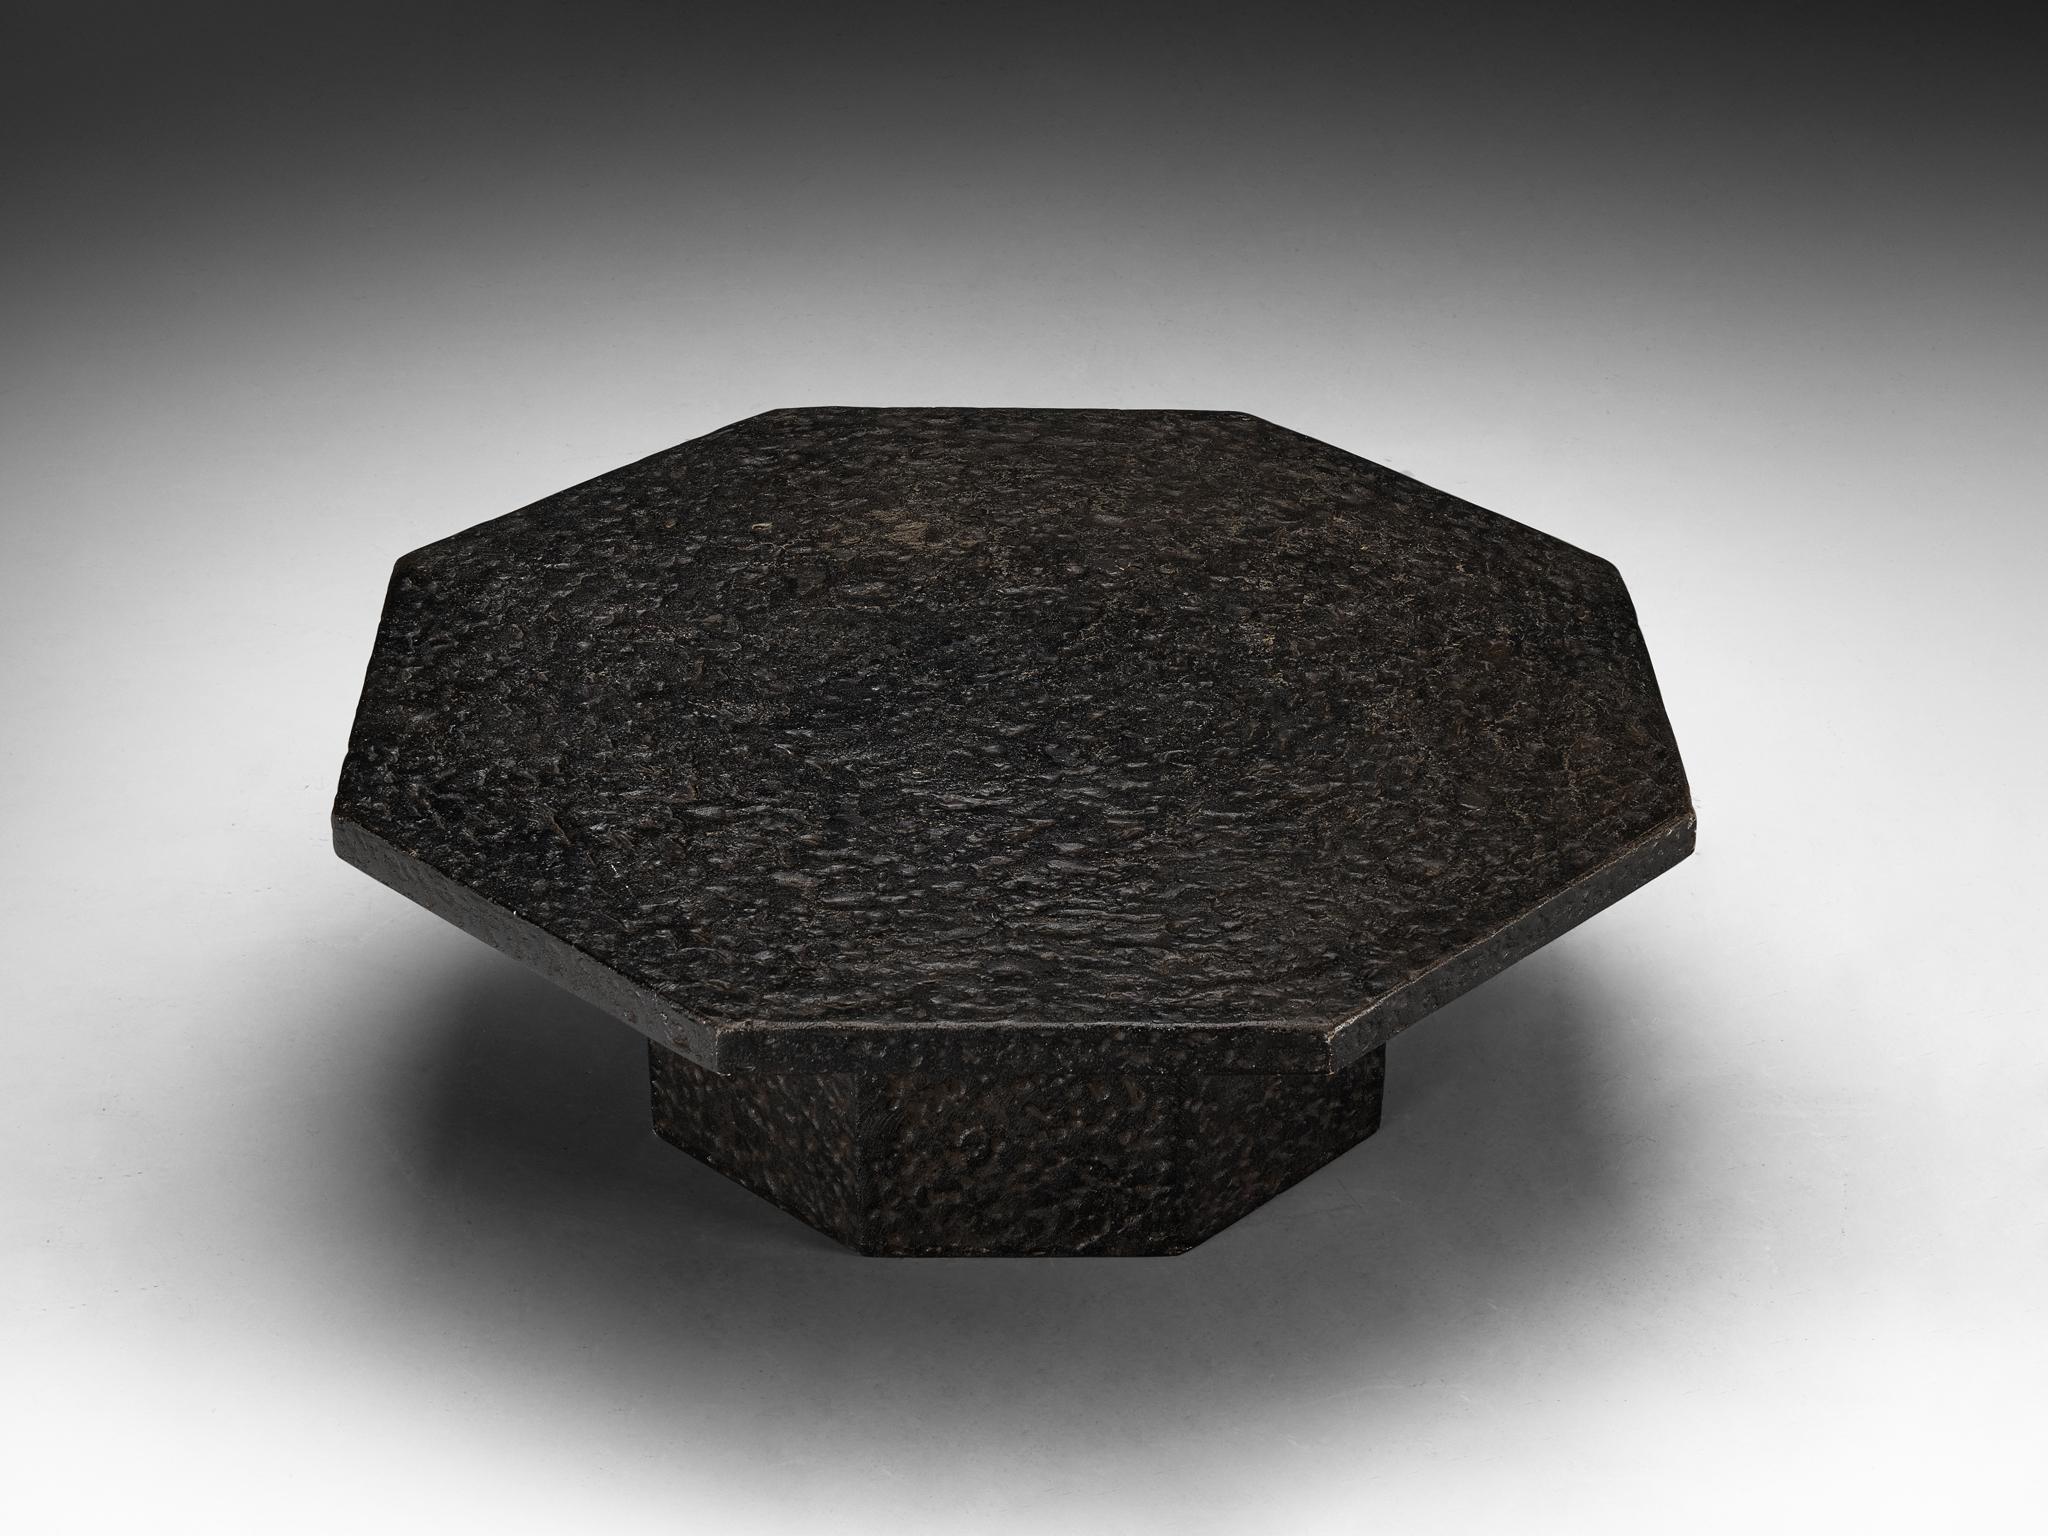 Cocktail table, resin, Northern-Europe, 1970s.

This deep black robust coffee or cocktail table is from the 1970s. The thick octagonal shaped top is supported by a smaller column. The whole construction is executed in resin which resembles the